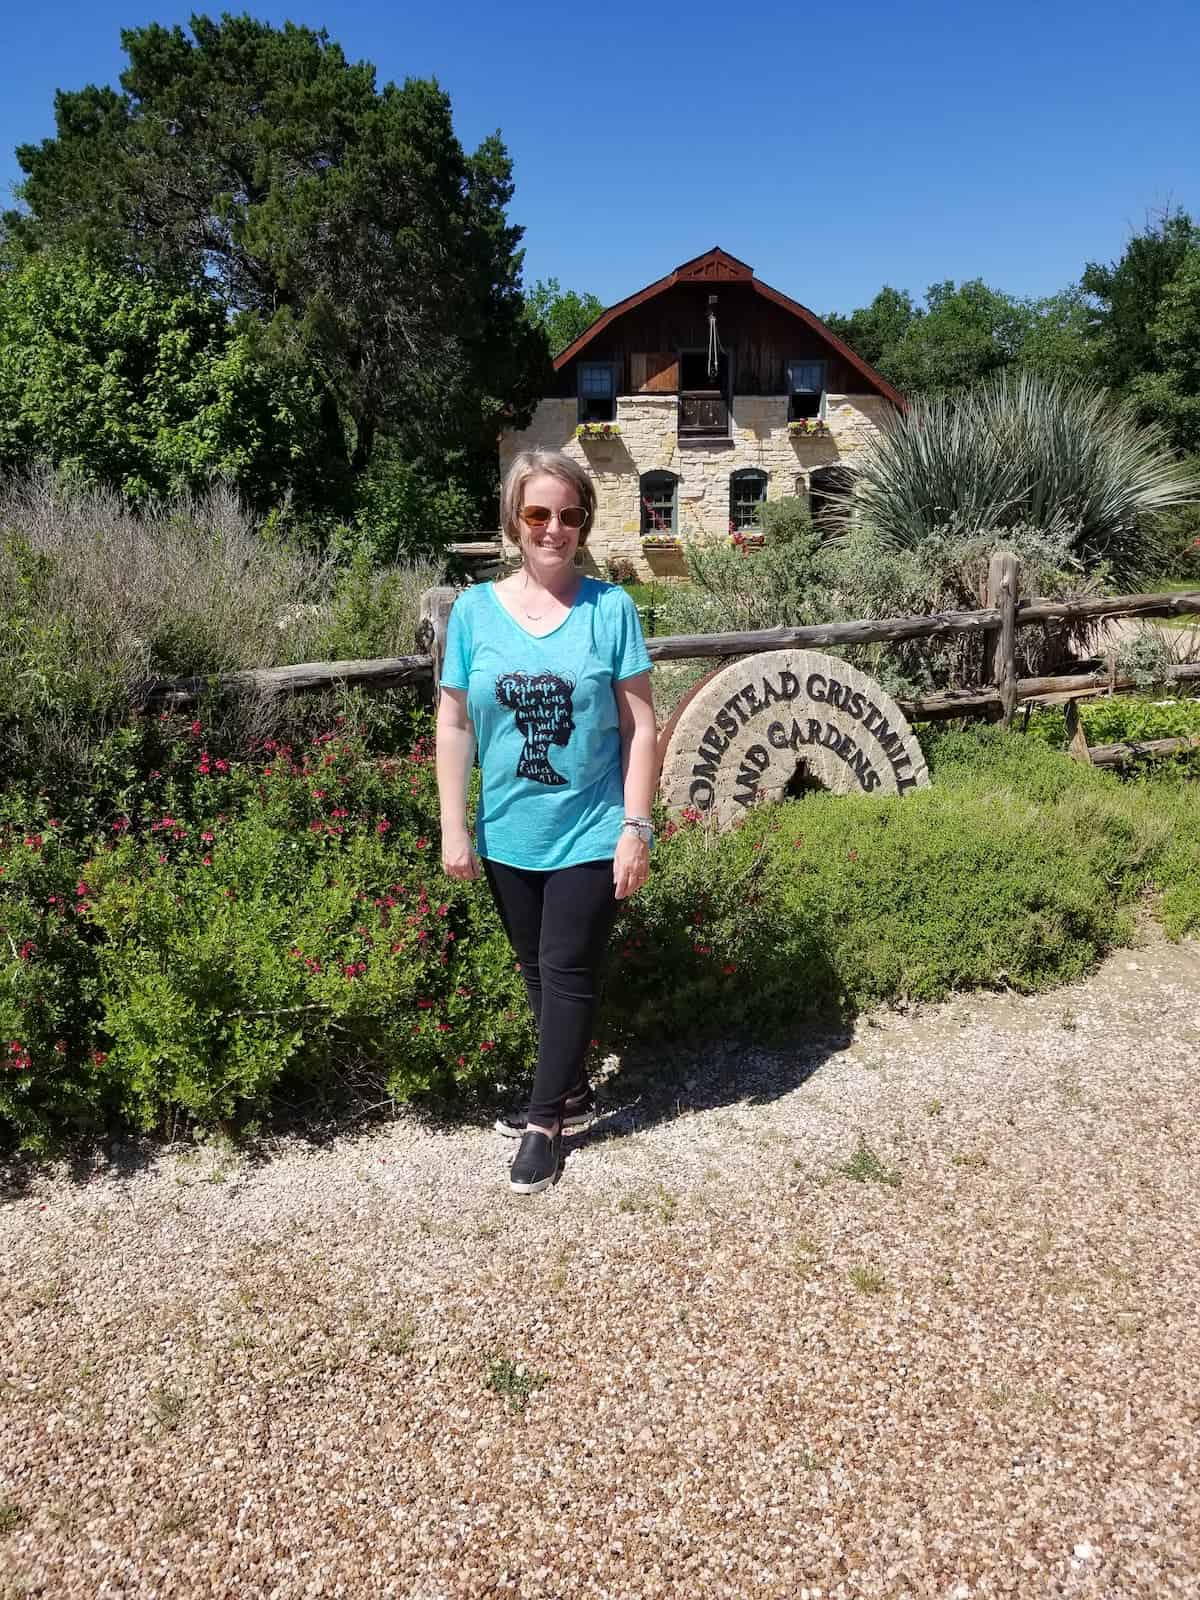 Woman standing in front of a rustic building with a sign reading "wildseed farms" surrounded by greenery and flowers.